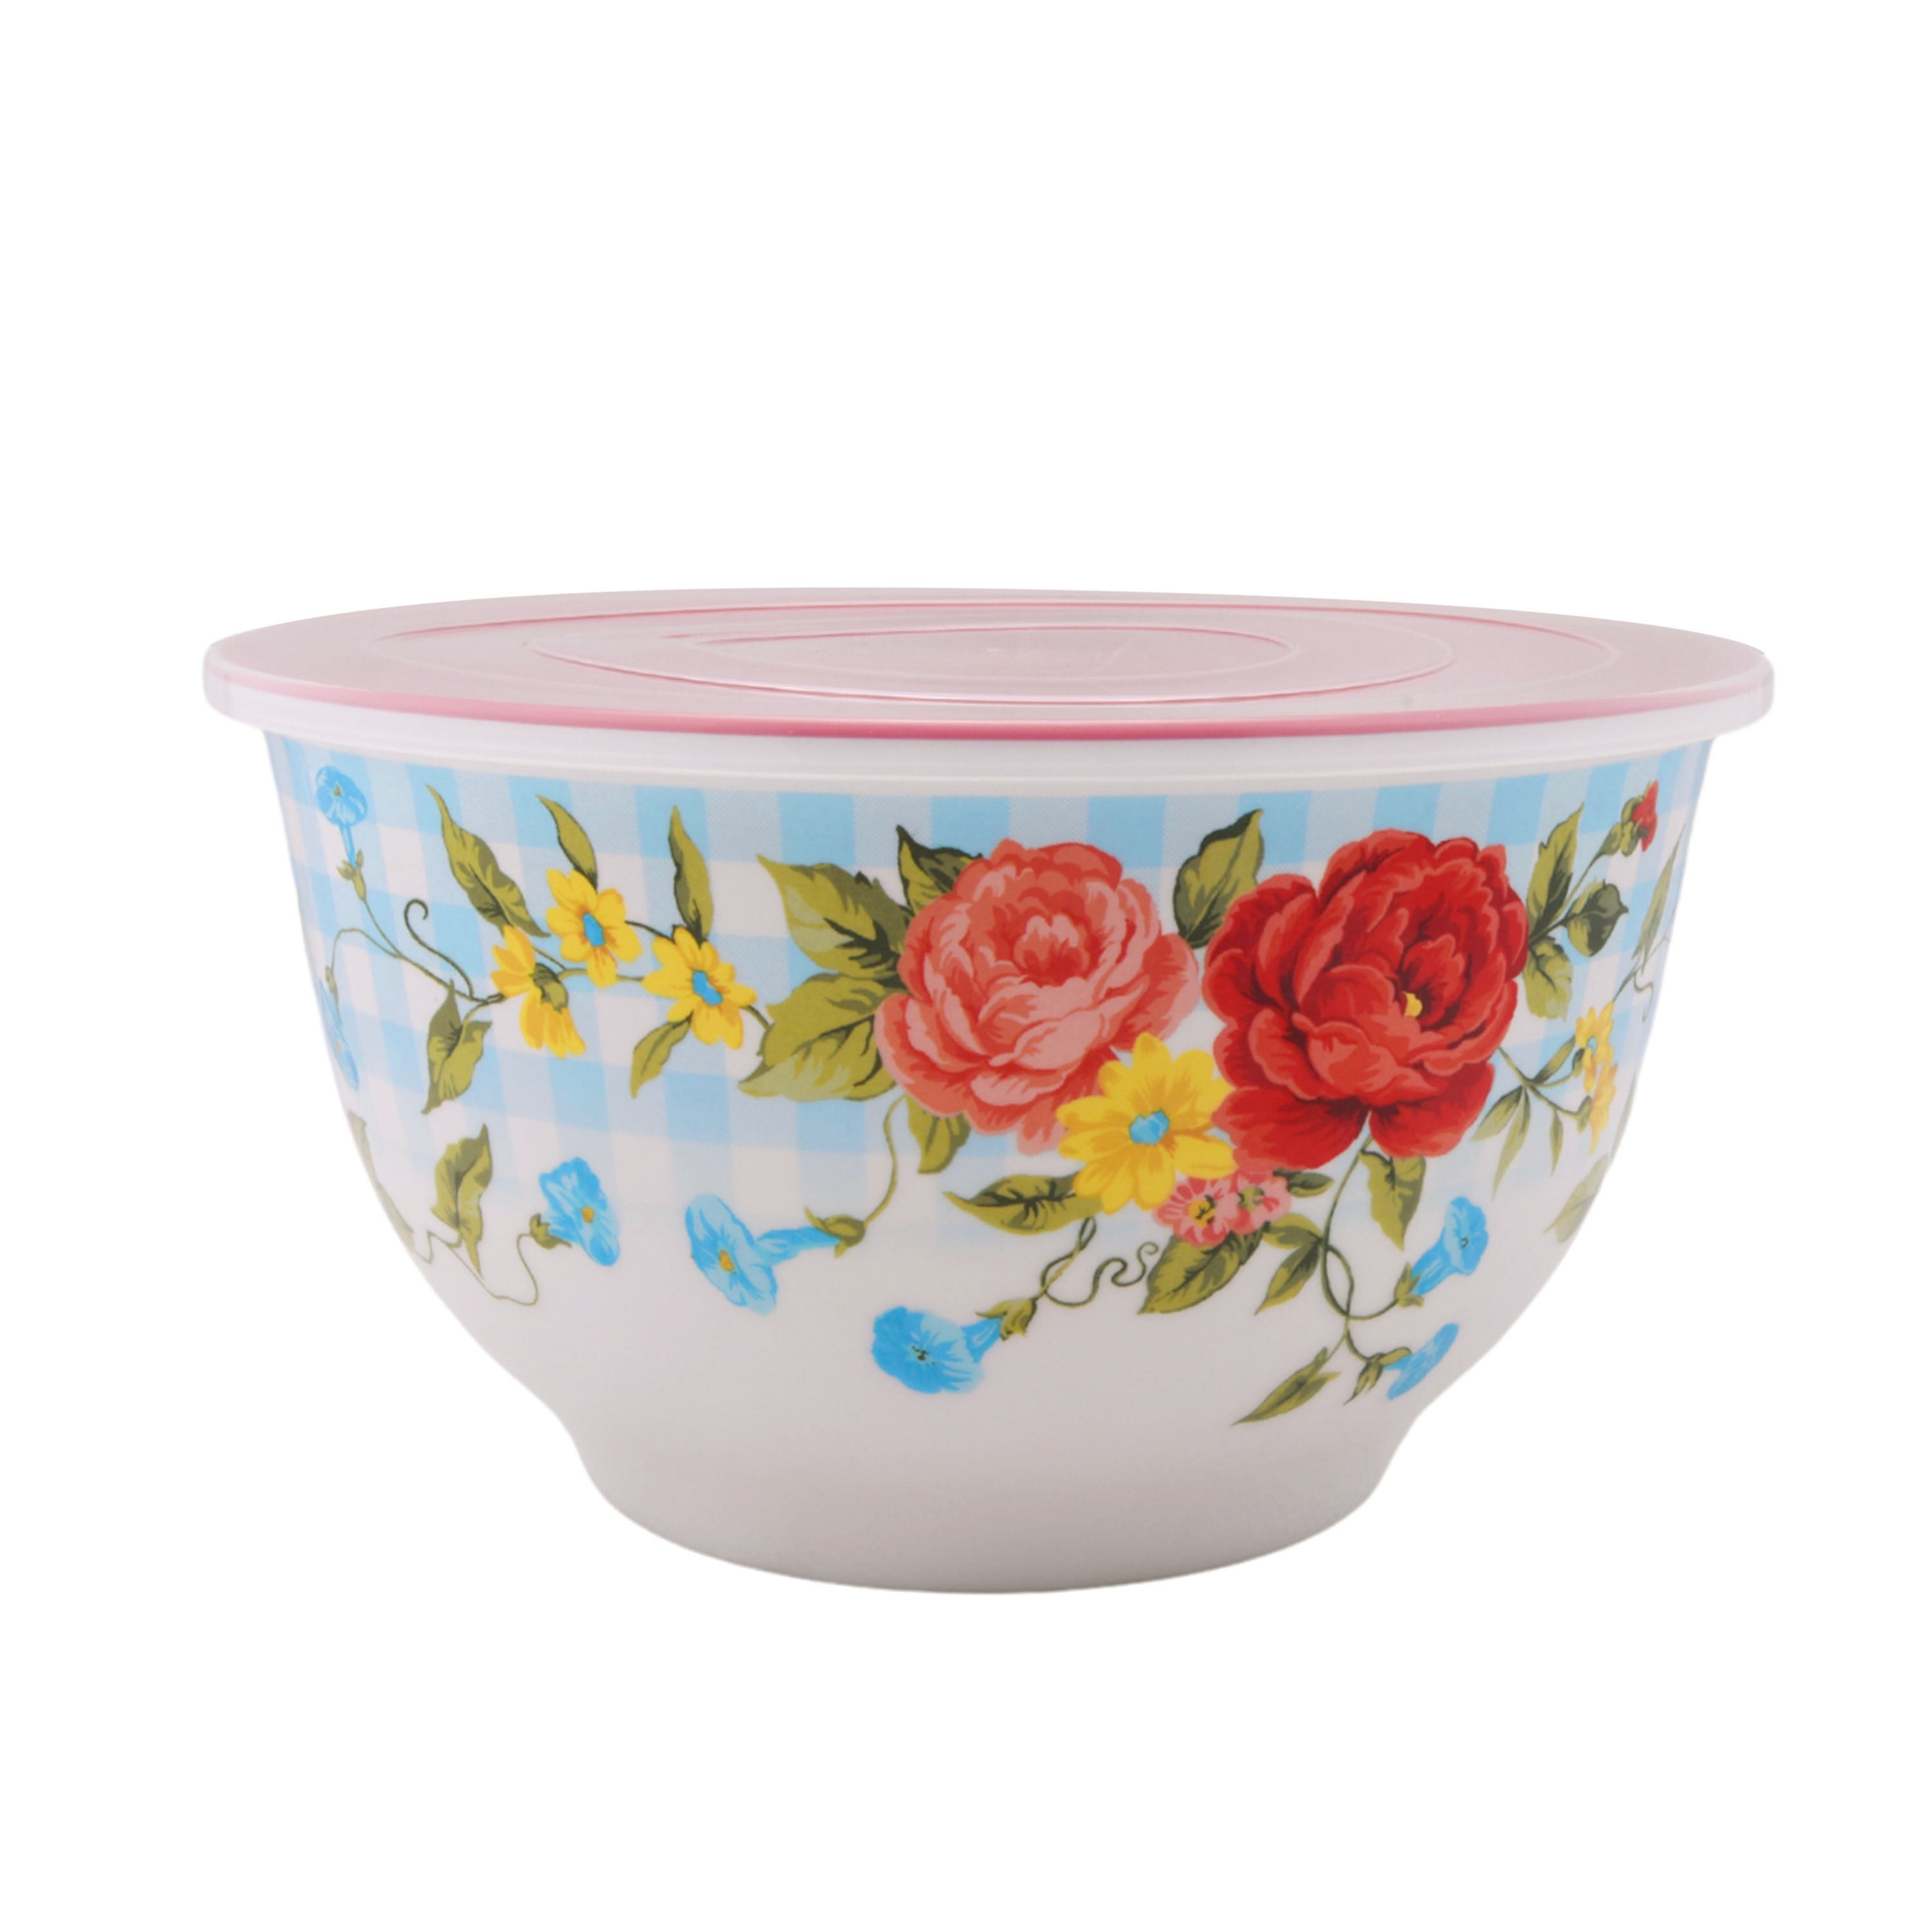 The Pioneer Woman Melamine Mixing Bowl Set with Lids, 18 Piece Set, Sweet  Rose 